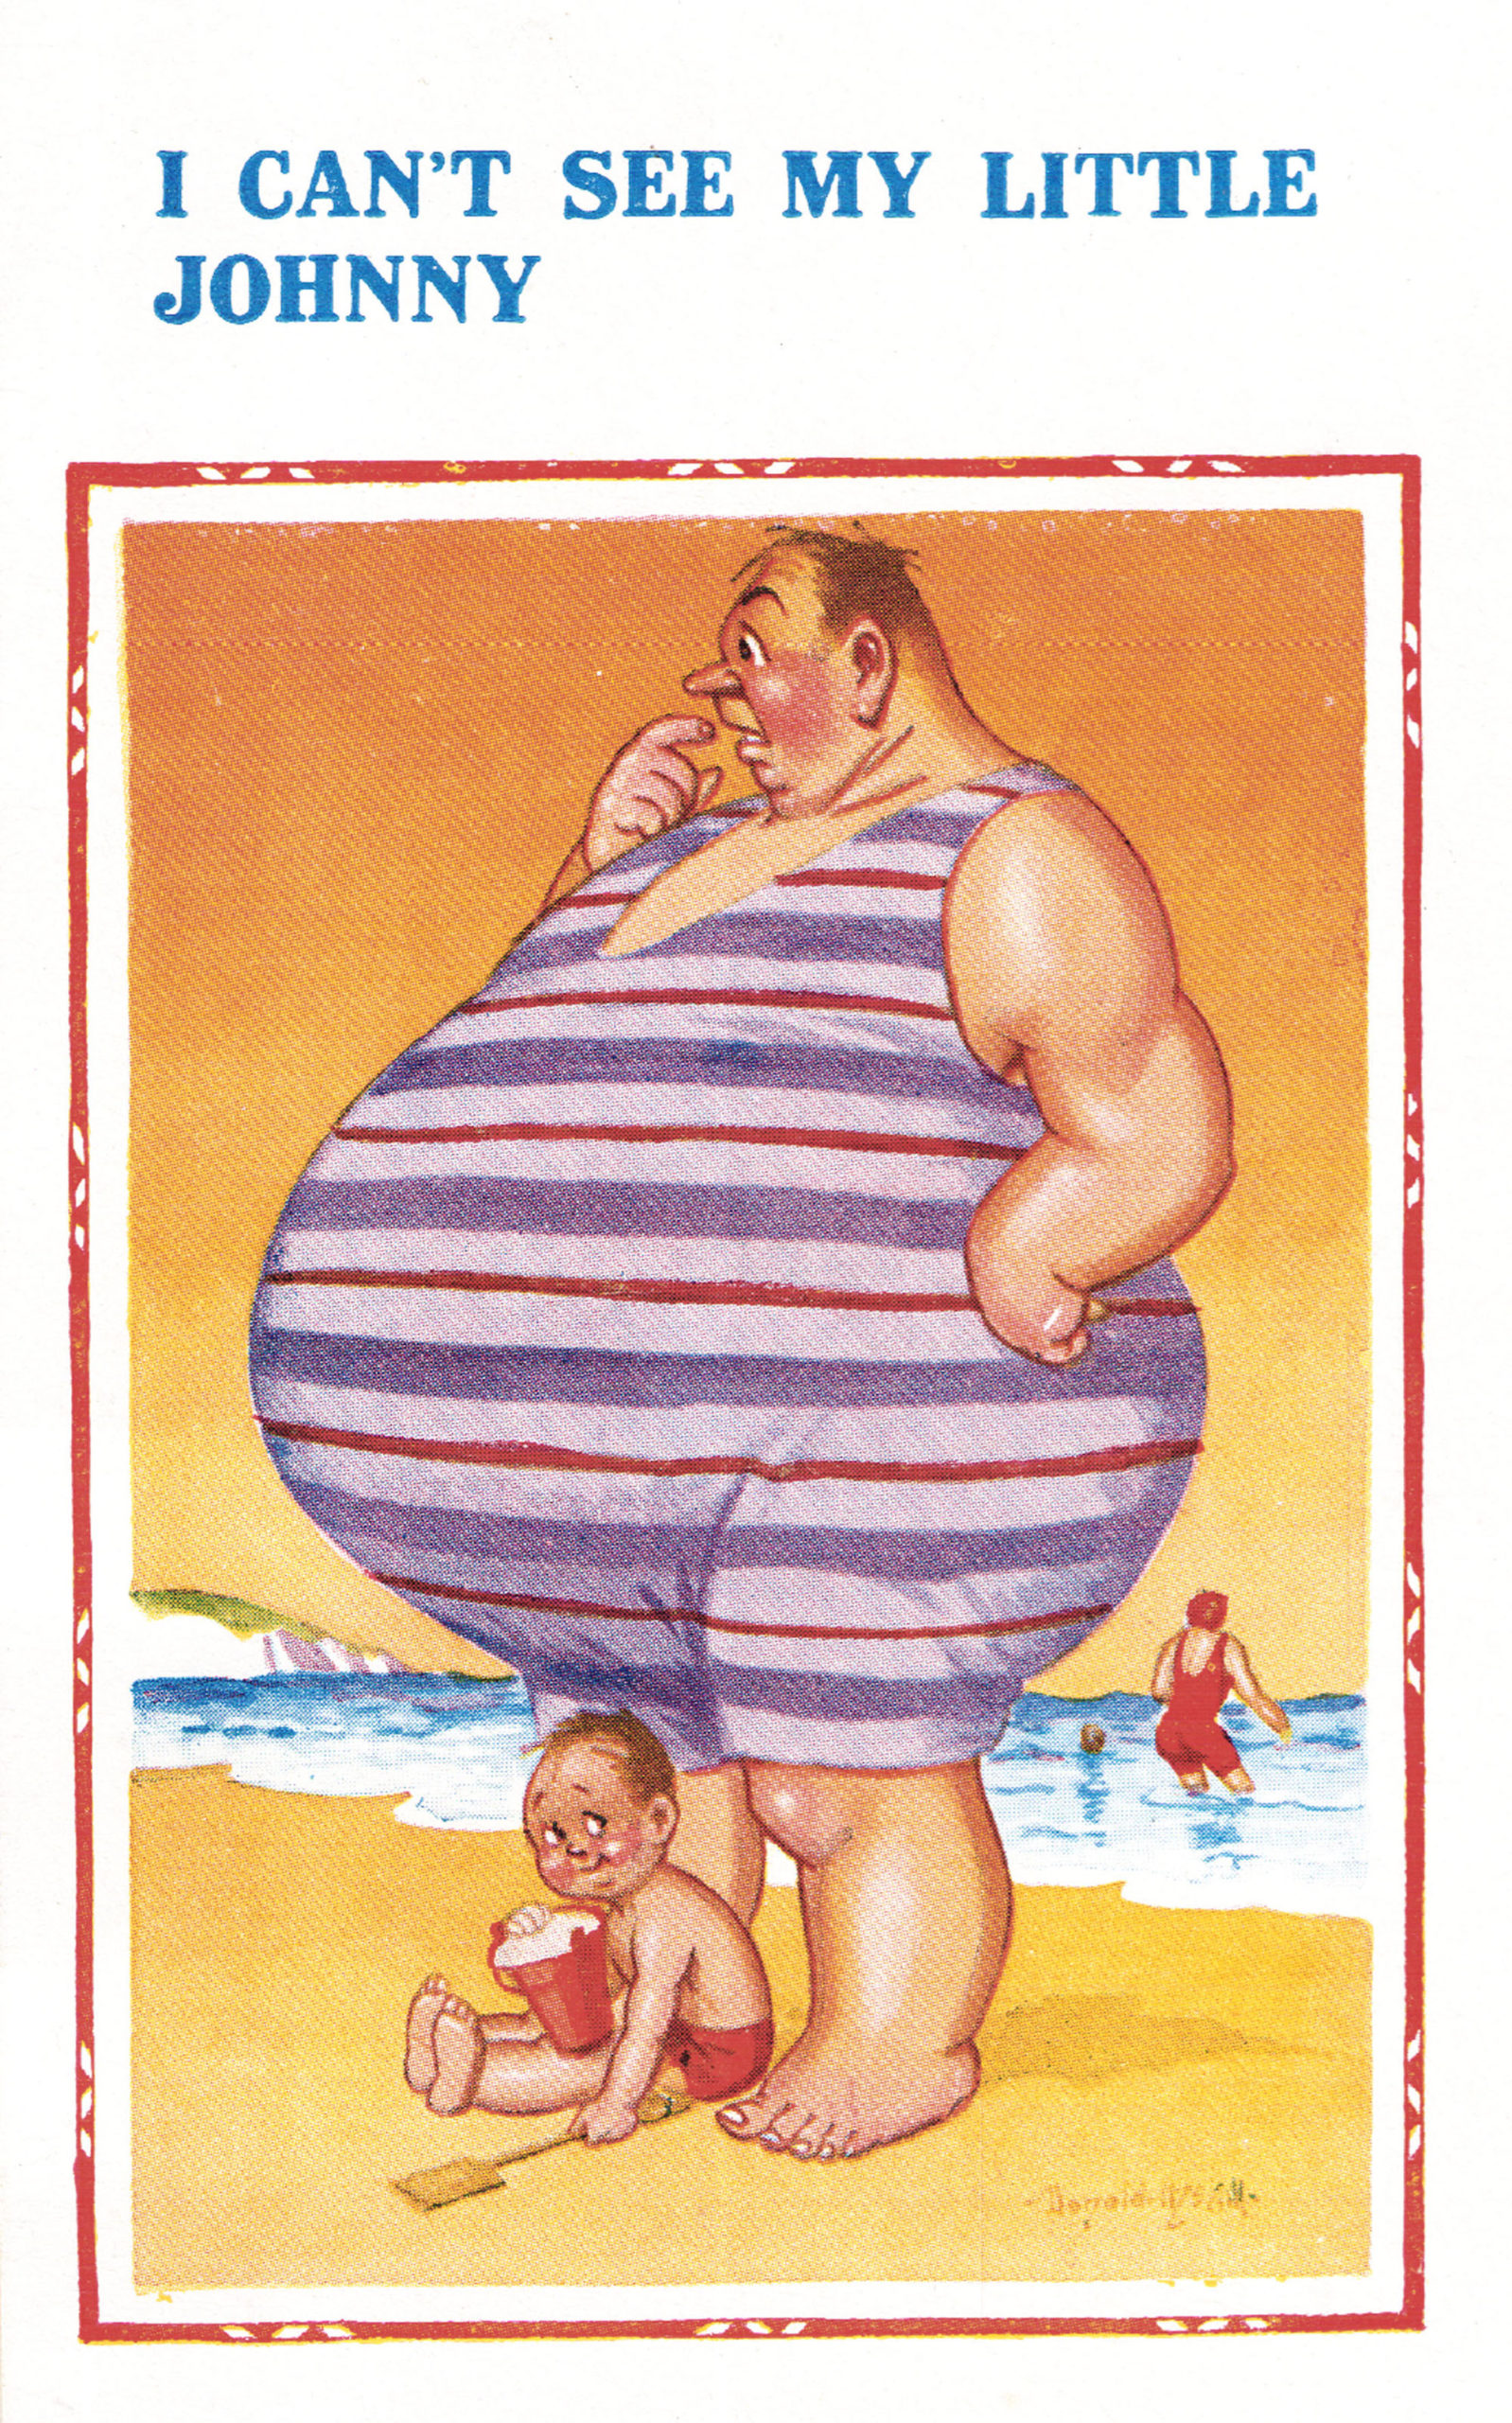 'I Can't See My Little Johnny' - Humorous saucy seaside postcard design by Donald McGill (1875-1962) © The Donald McGill Archive Collection / Mary Evans Picture Library